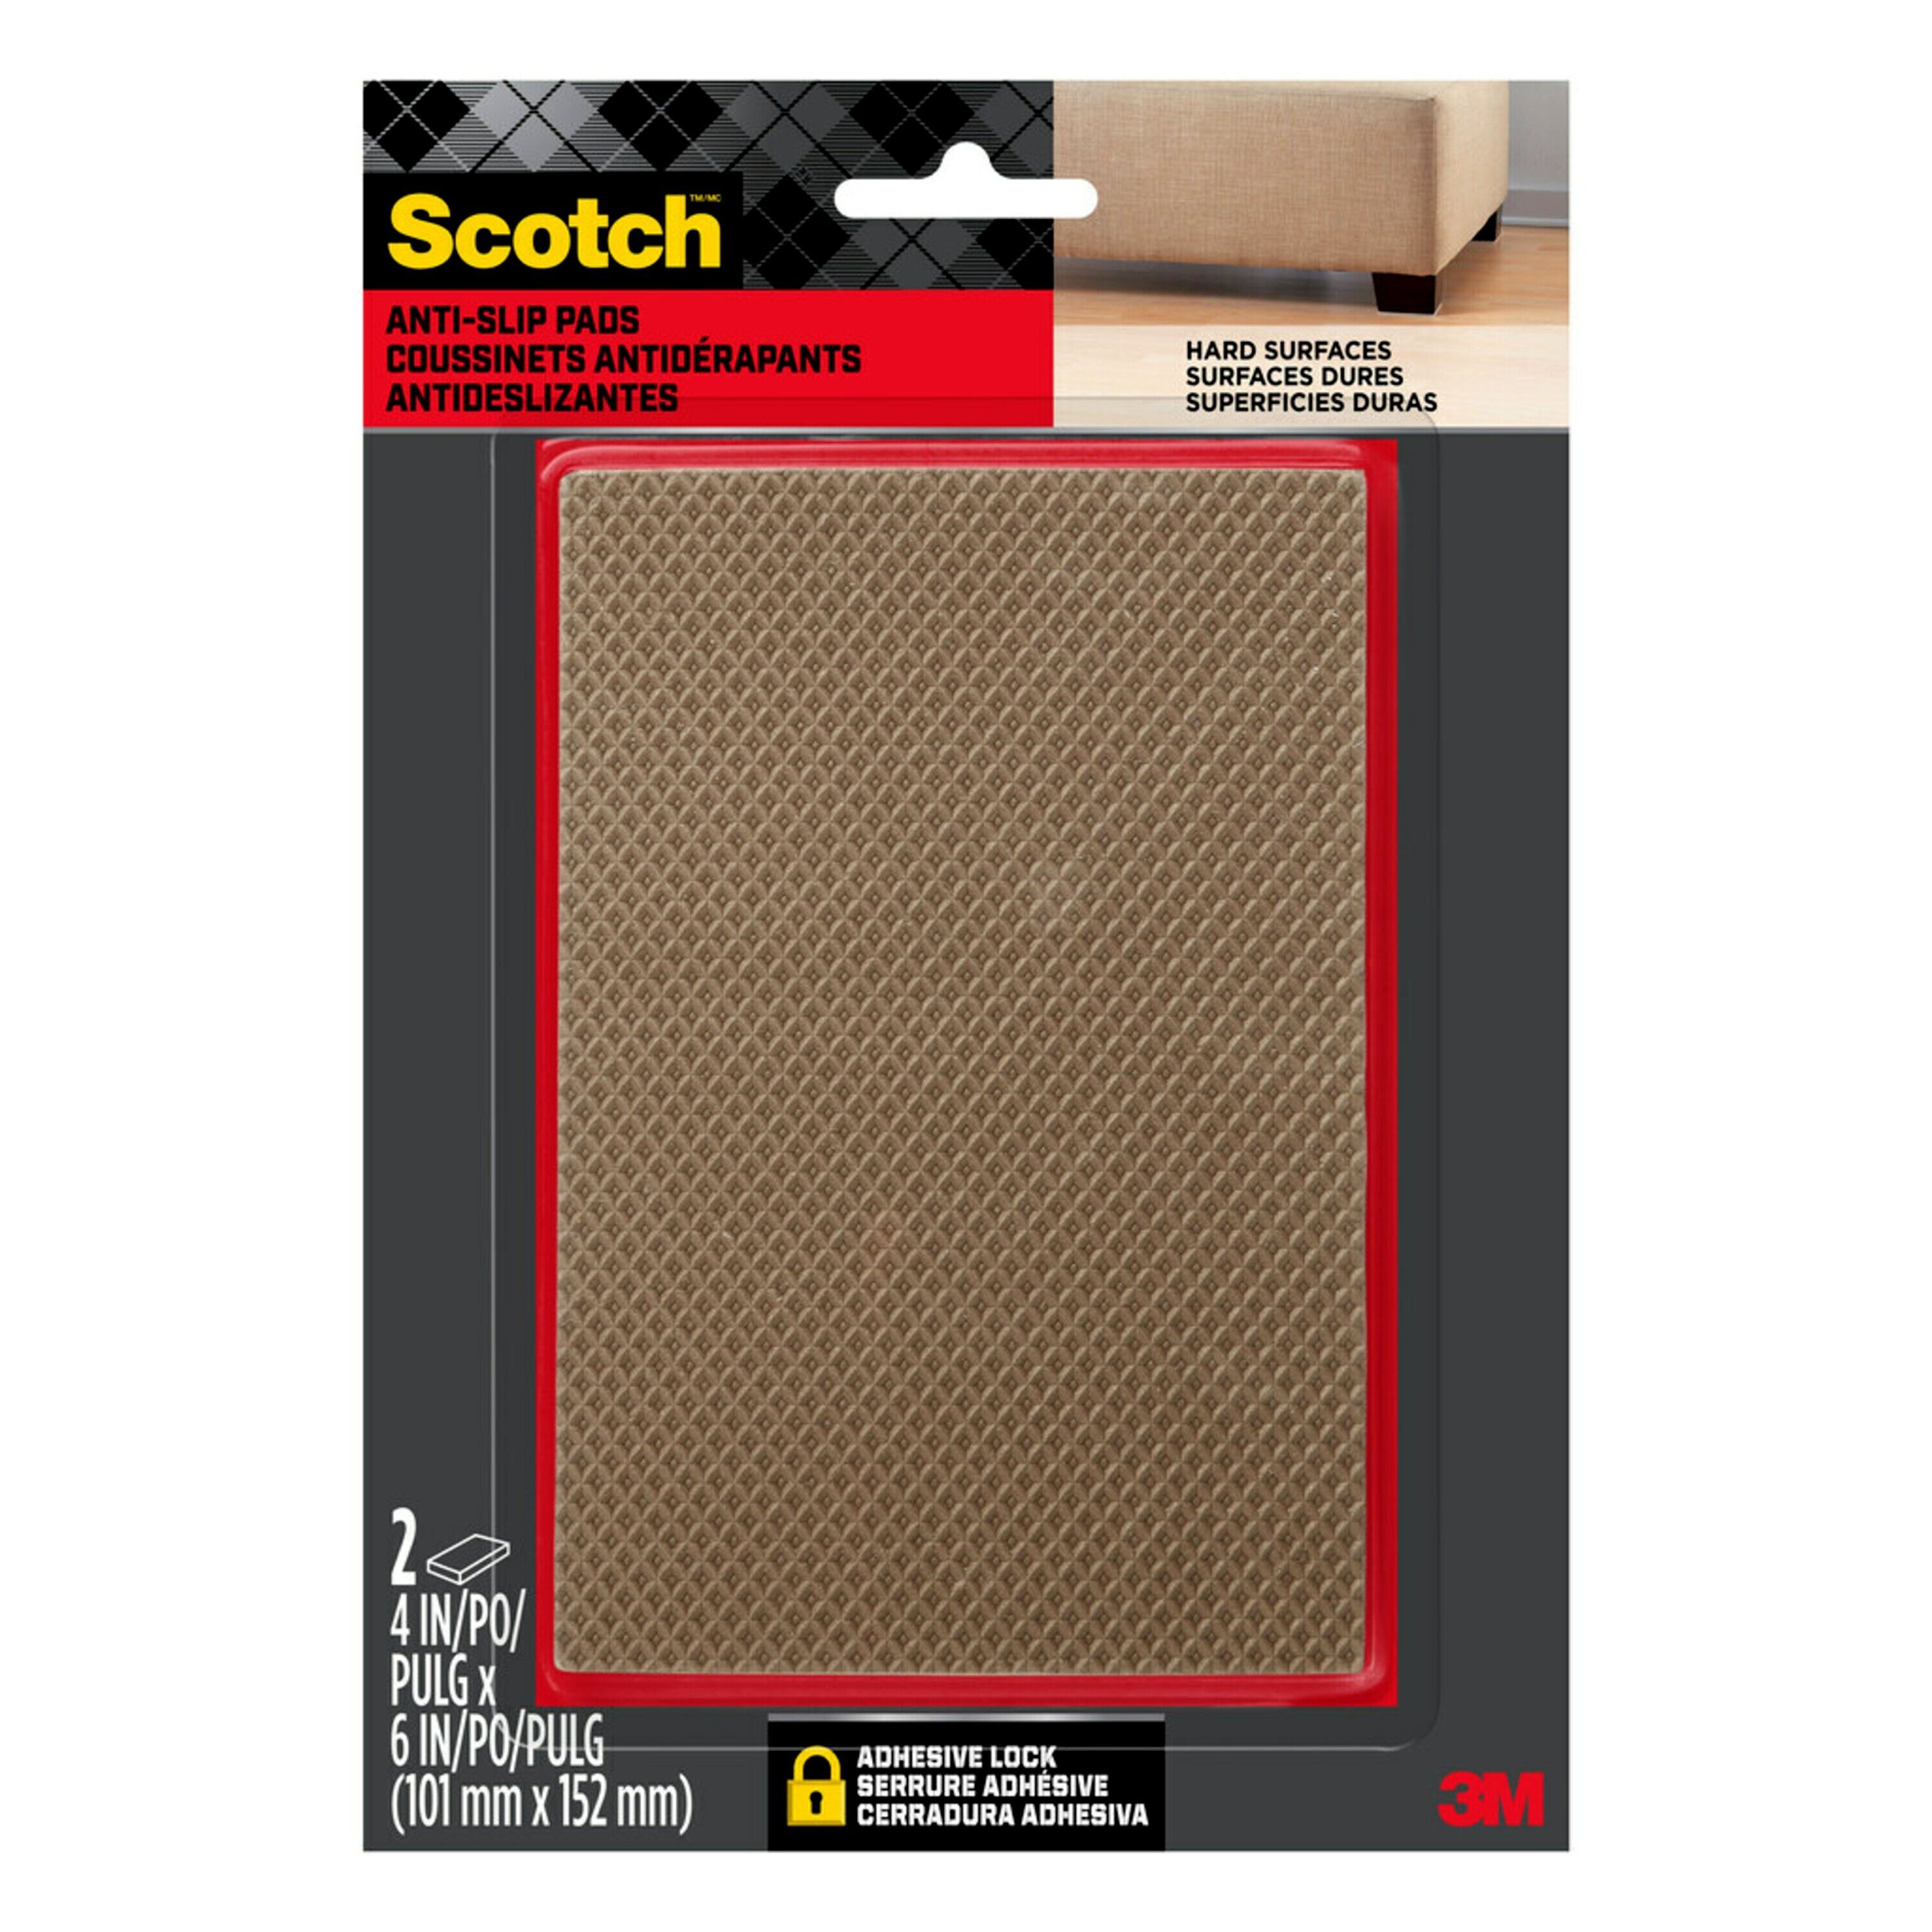 Scotch Gripping Pads, 1 in. Diameter, Brown, 24/Pack